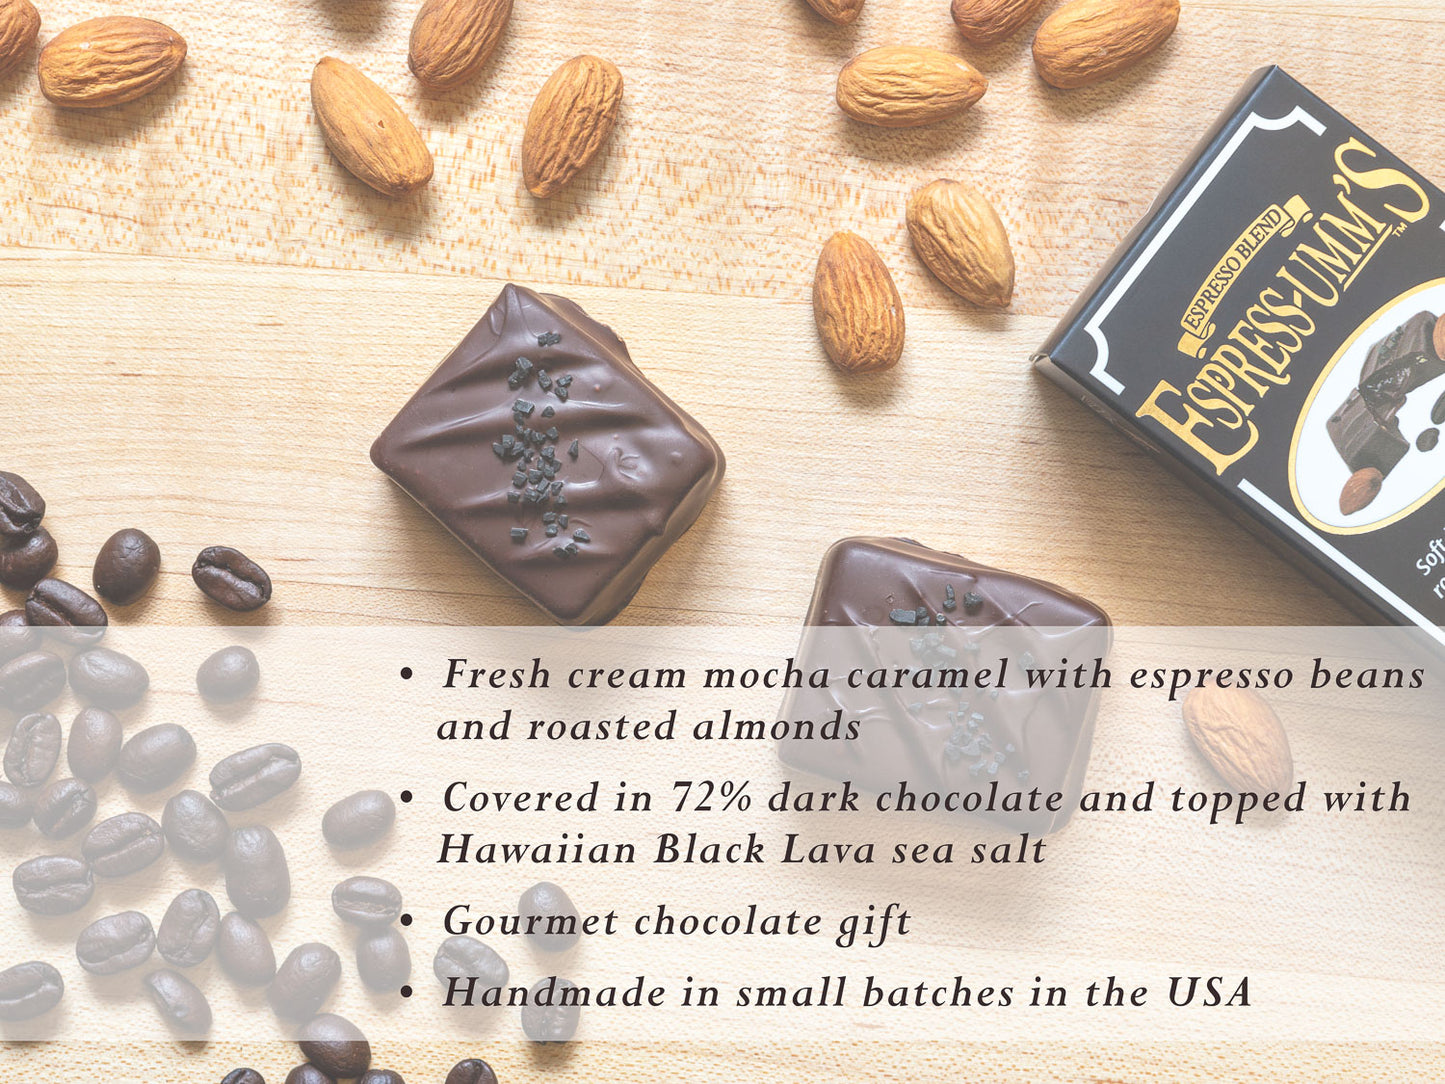 some of the features of the espress-uum's caramel